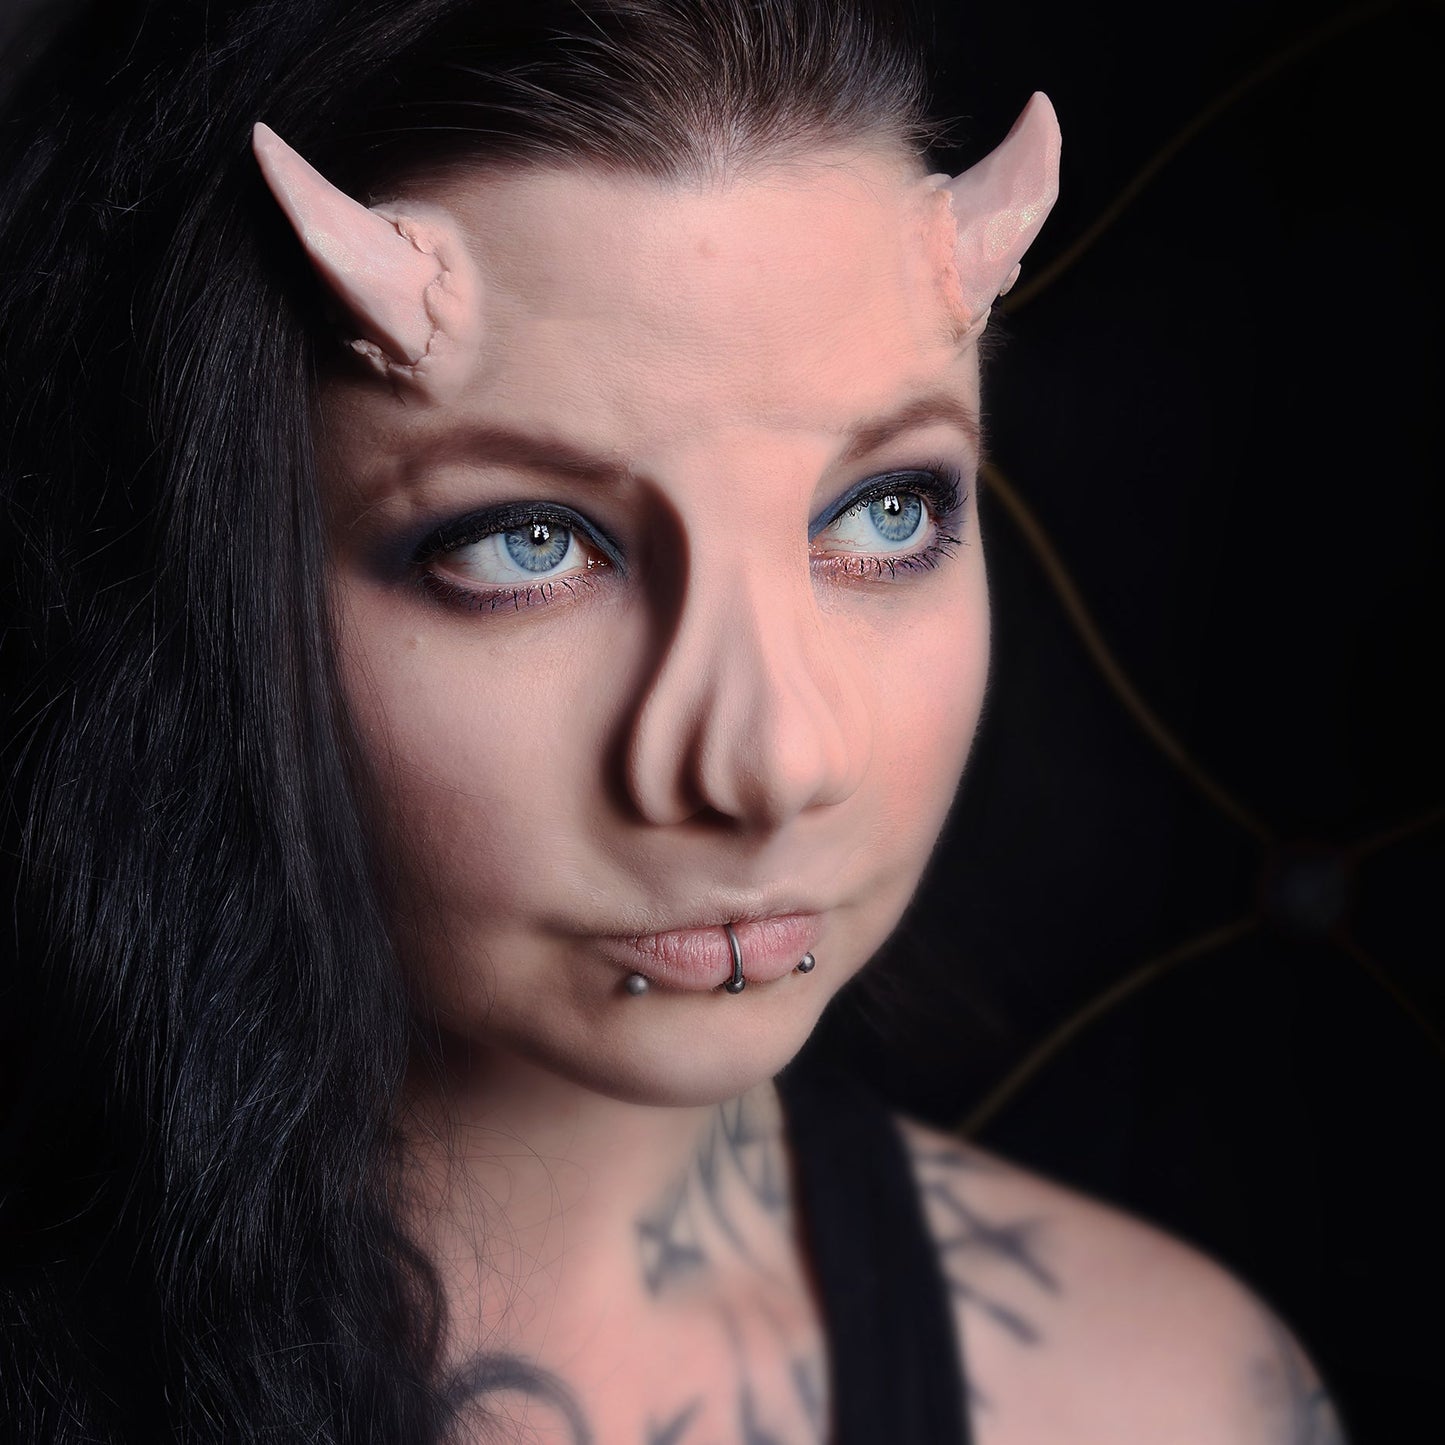 Woman with black hair wearing torn horns and a whelk nose prosthetic